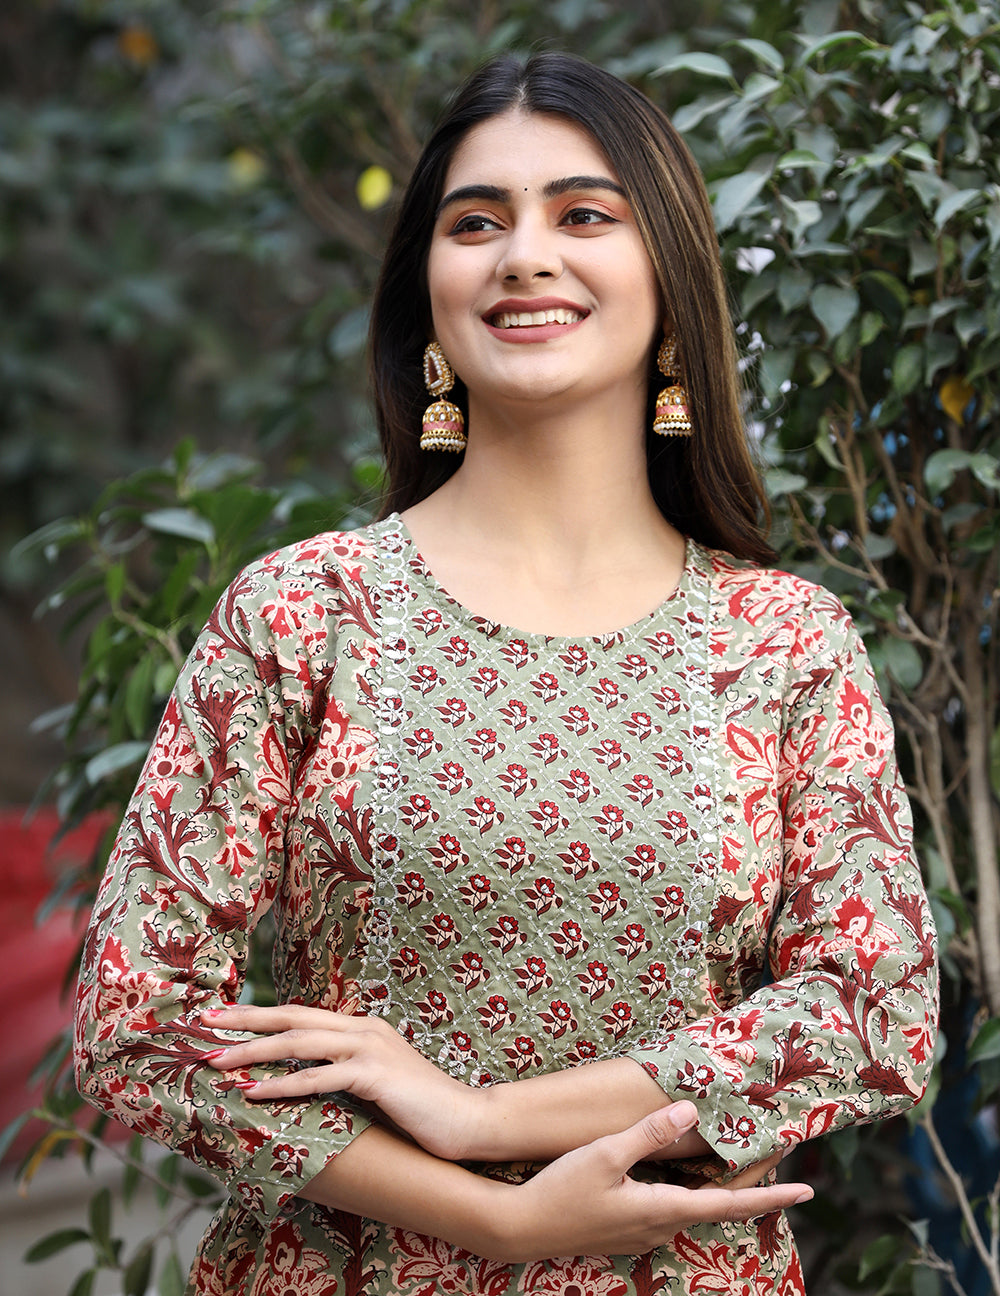 Green Kurta and Pant Set Are Available for Women in Sale | Buy It Now 